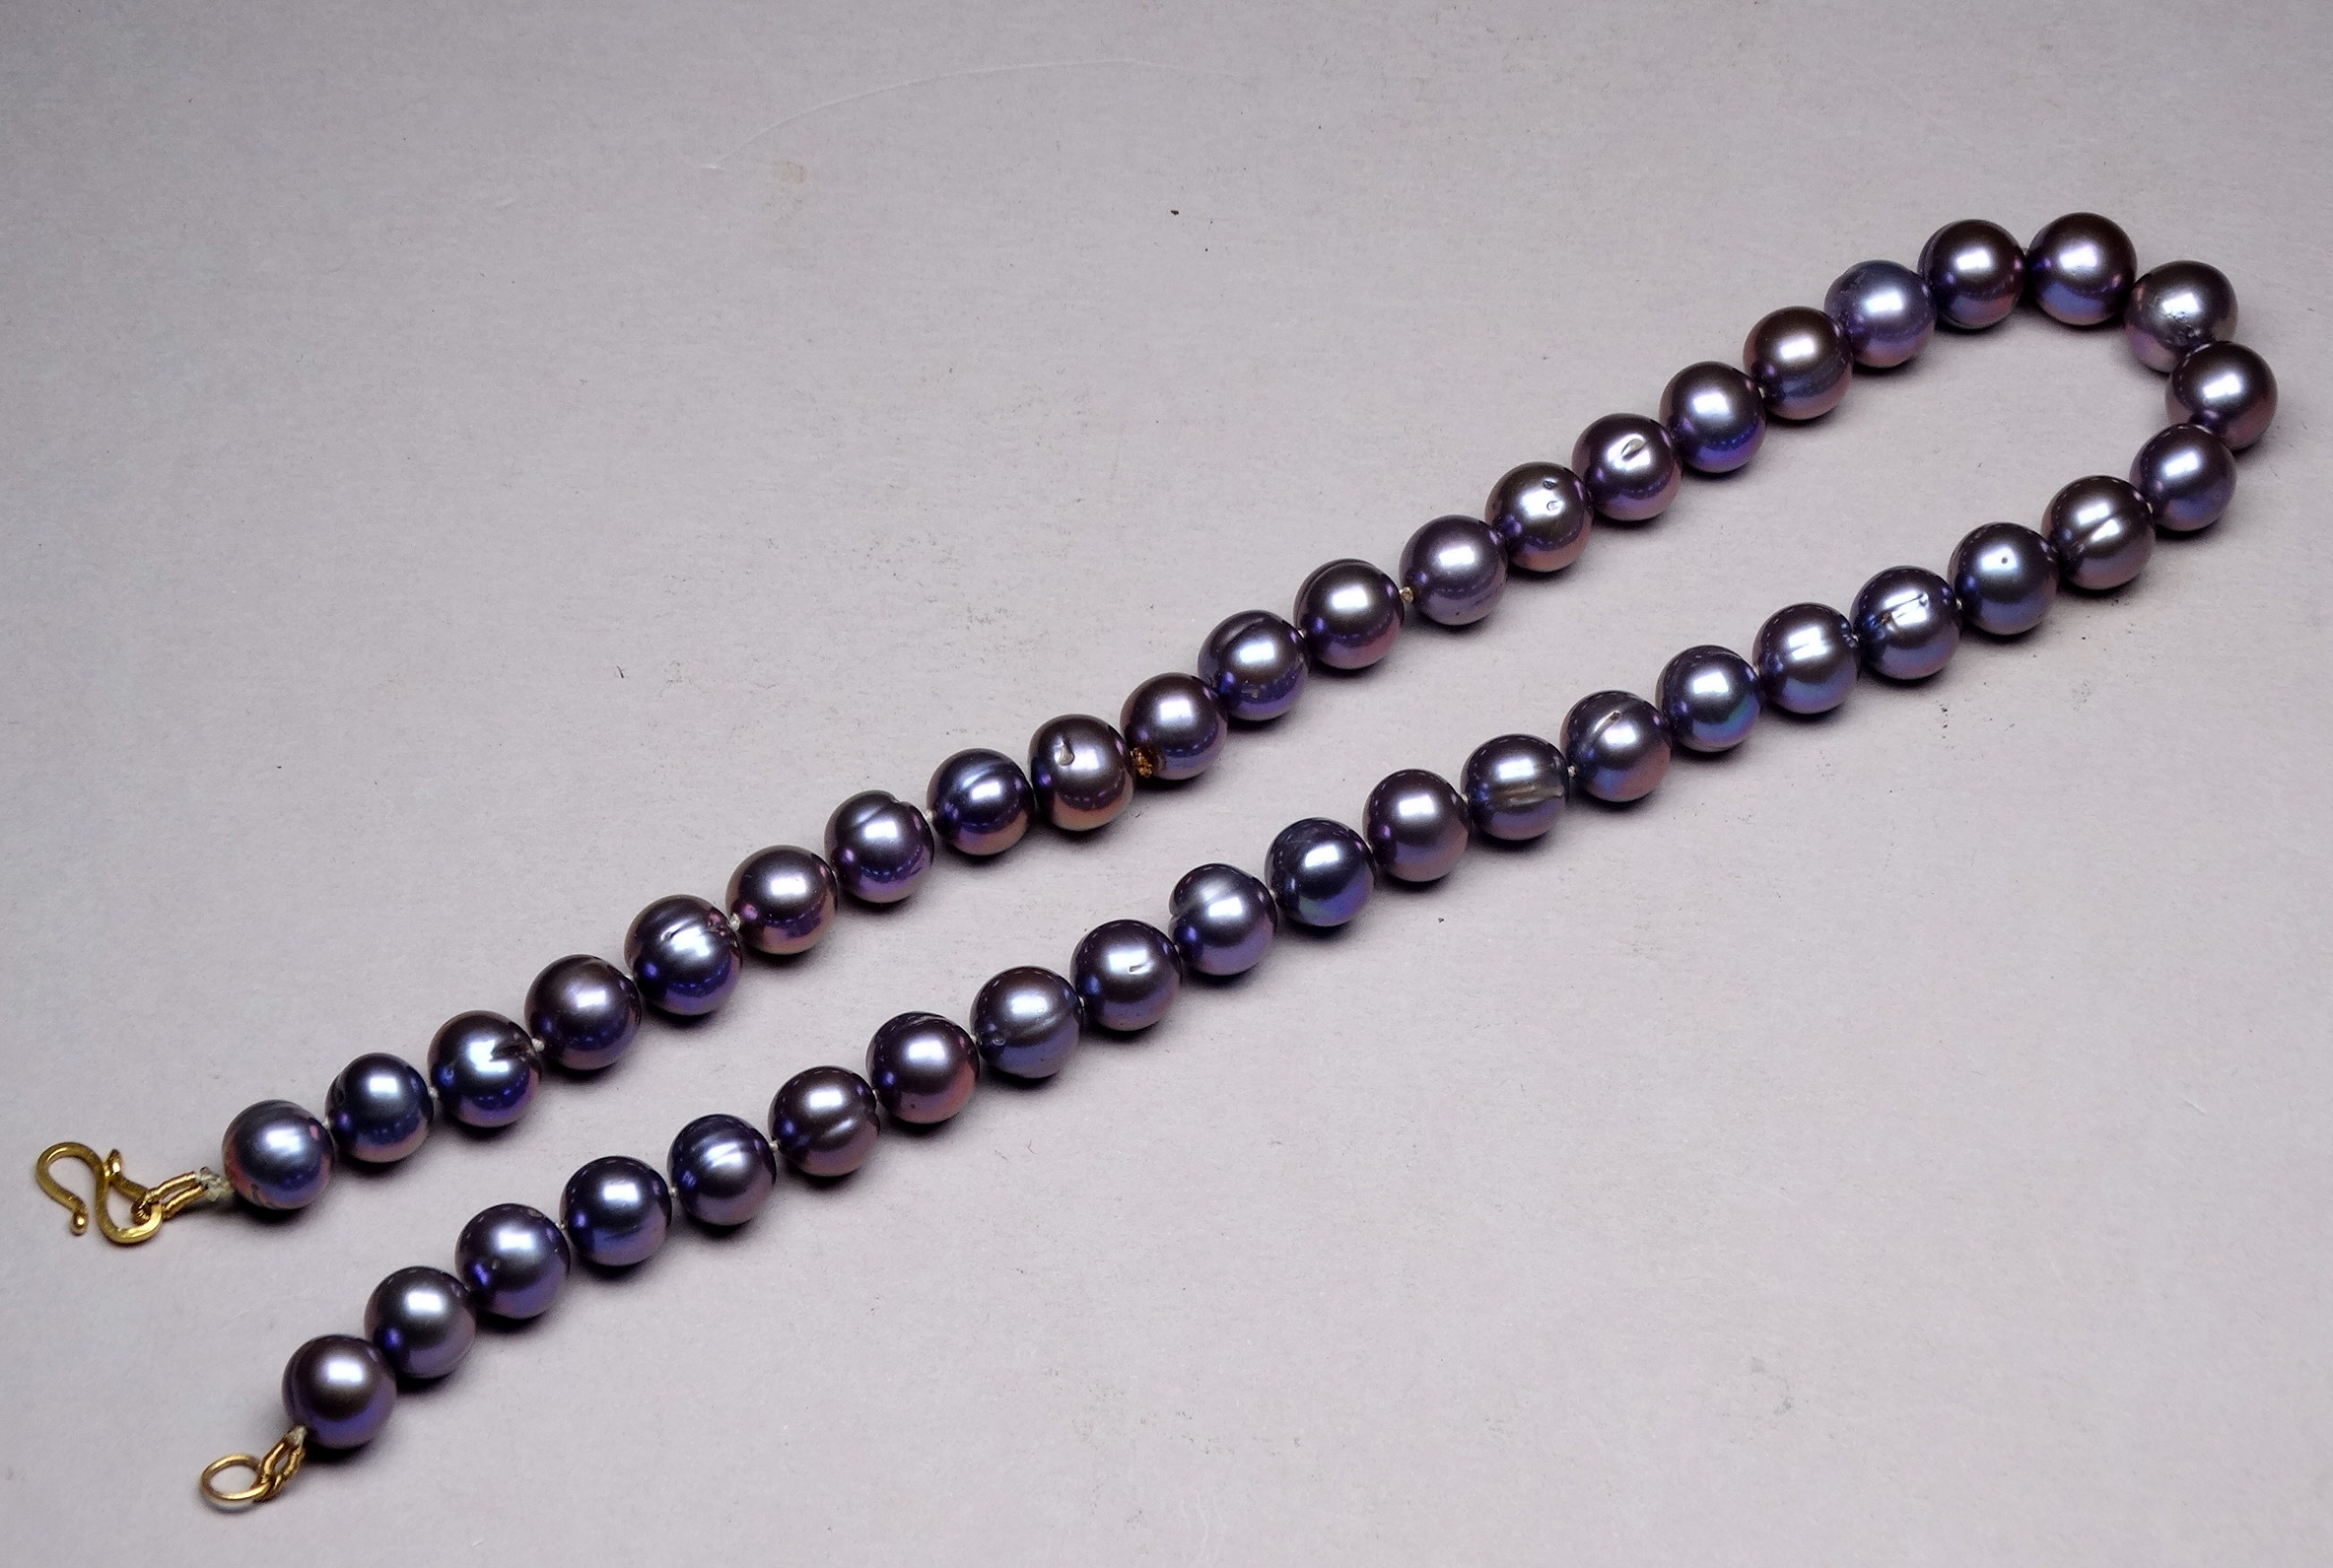 A string of uniform black Tahitian pearls - with a yellow metal S shaped clasp, possibly 9ct.